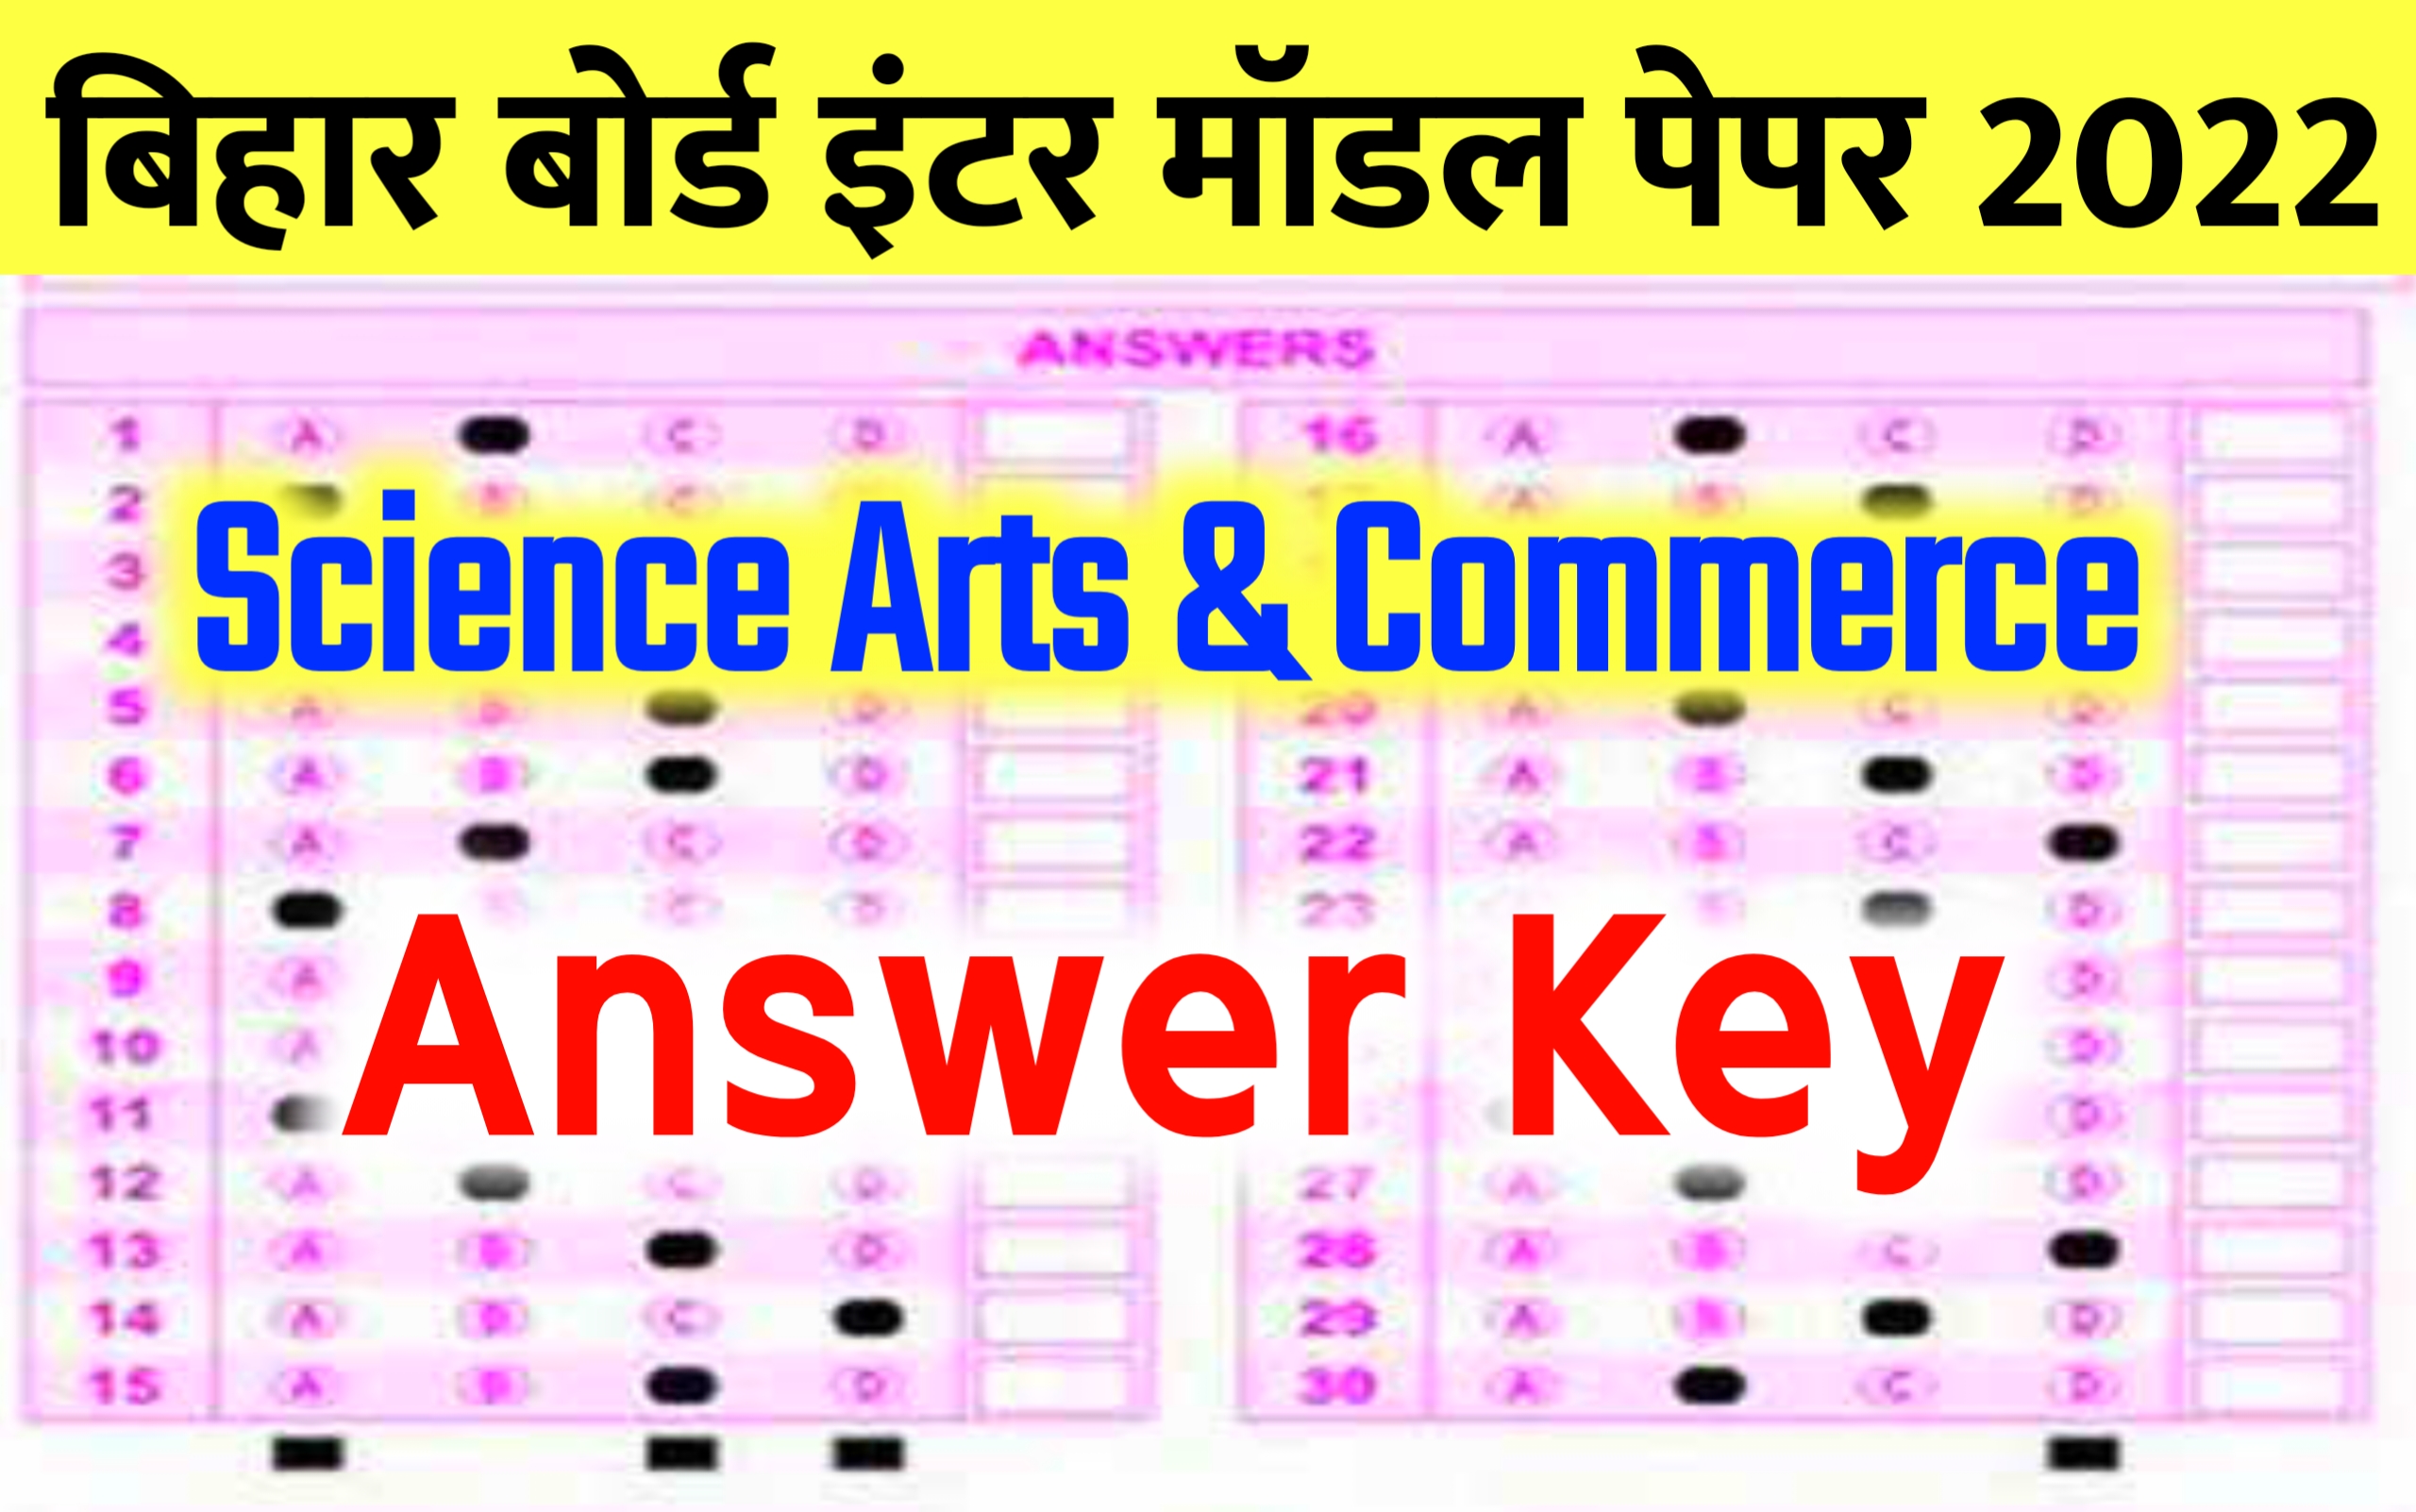 Bihar Board 12th Model Paper Answer Key 2022 All Subject | Bseb Inter Official Model Paper Answer Key 2022